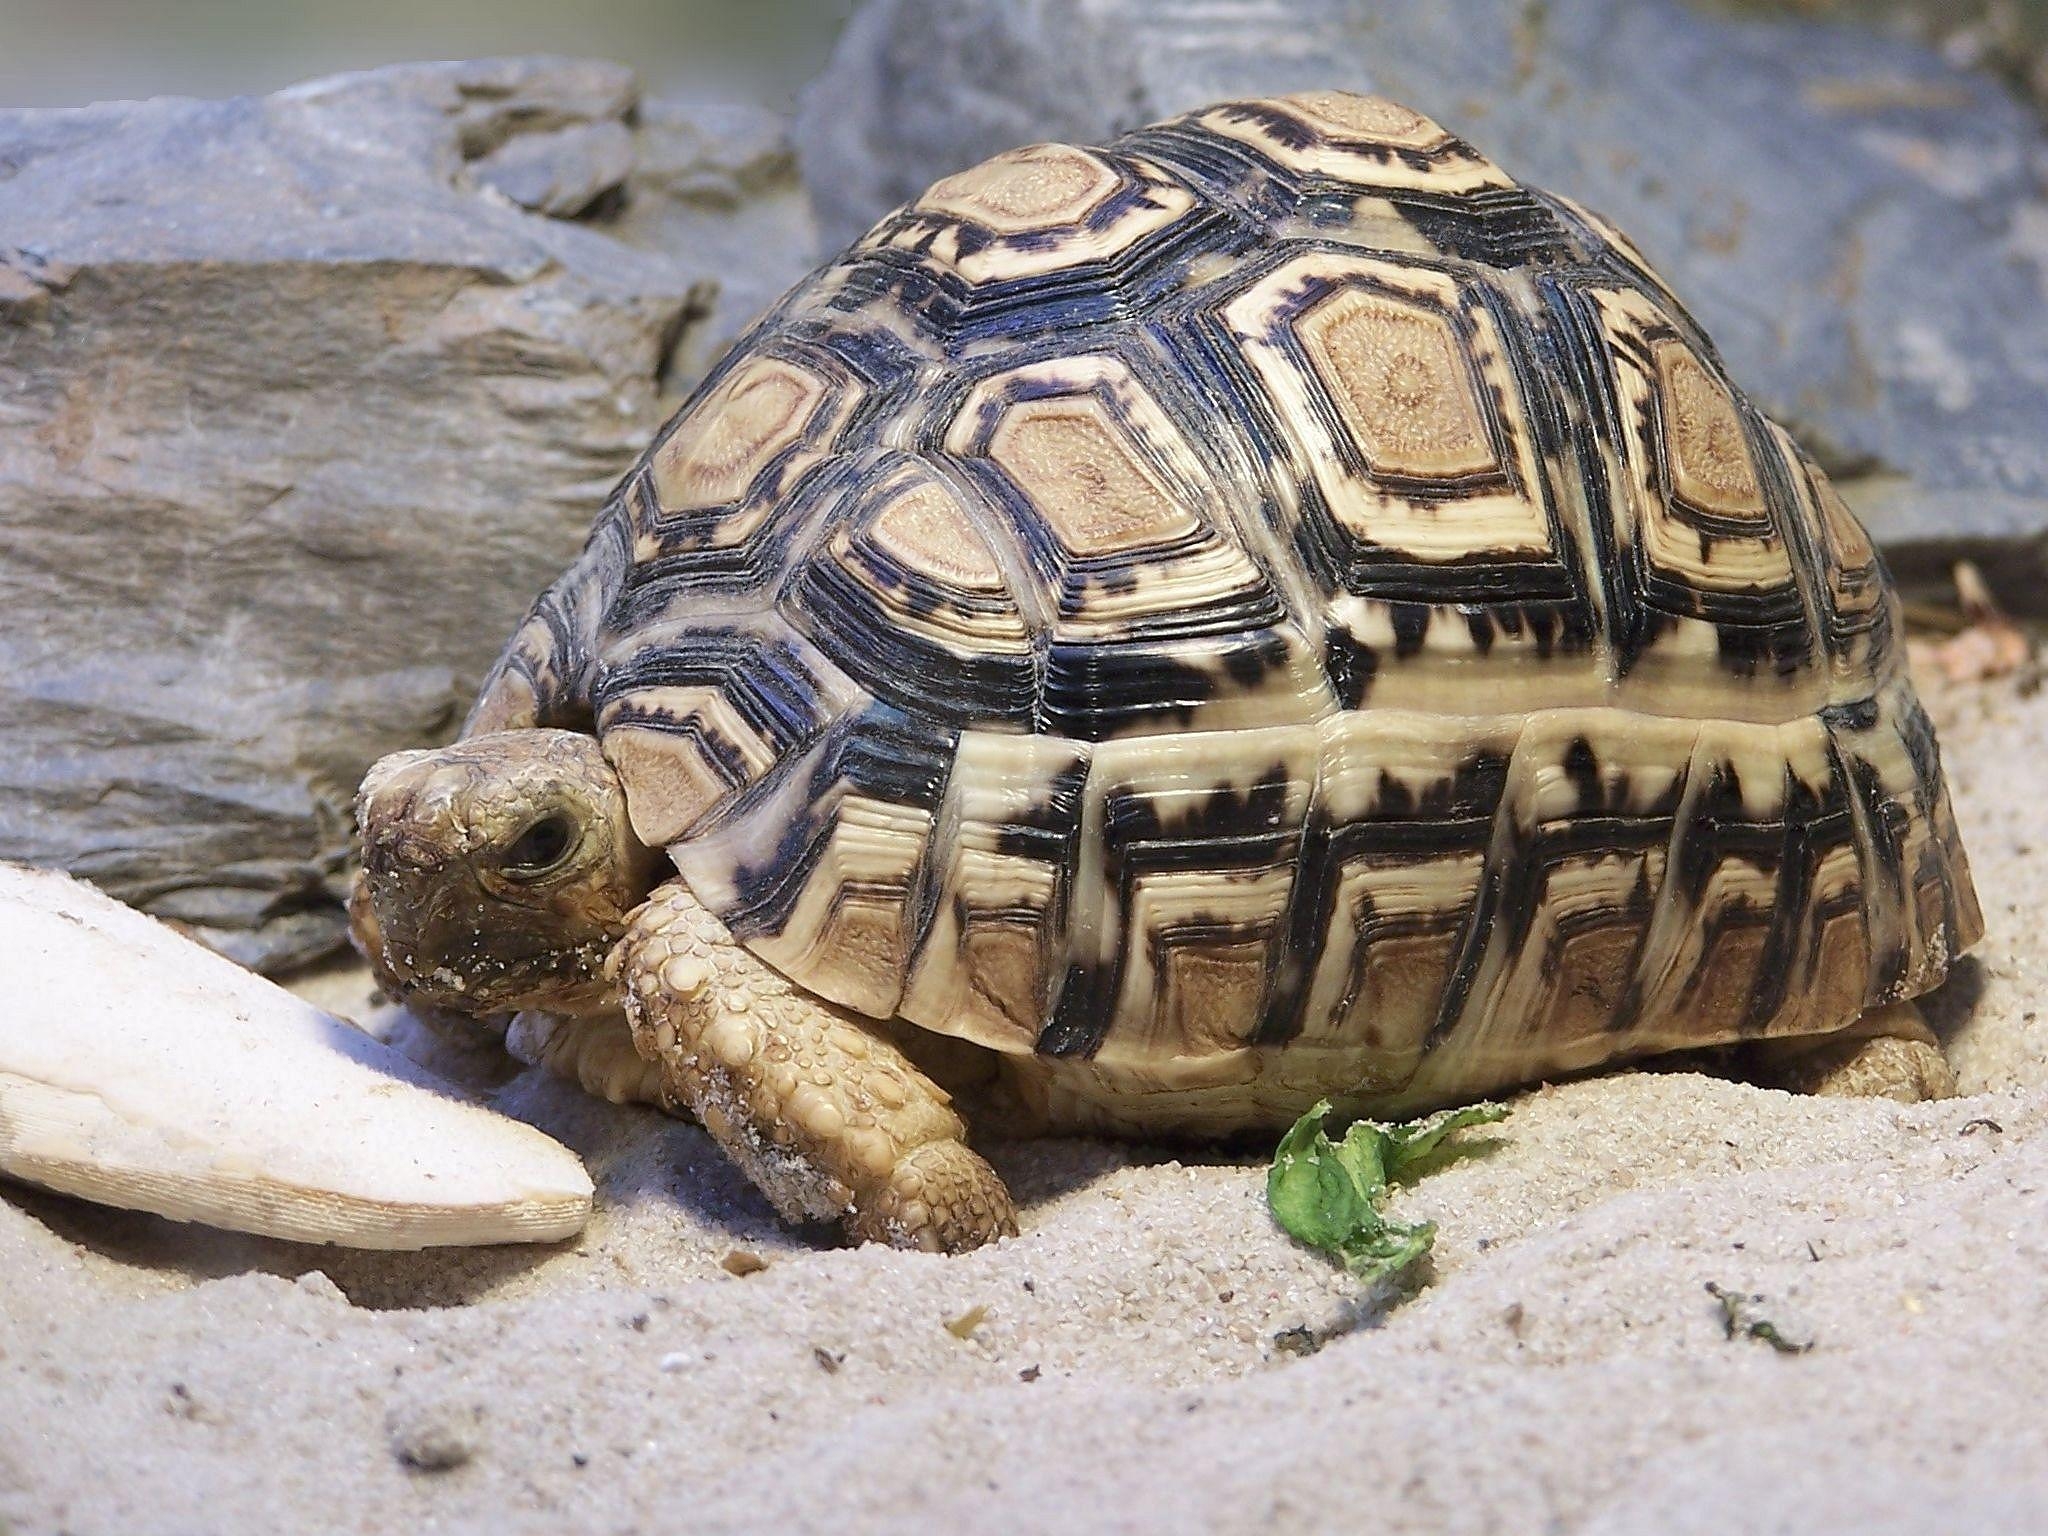 animals, sand, big, carapace, shell, turtle